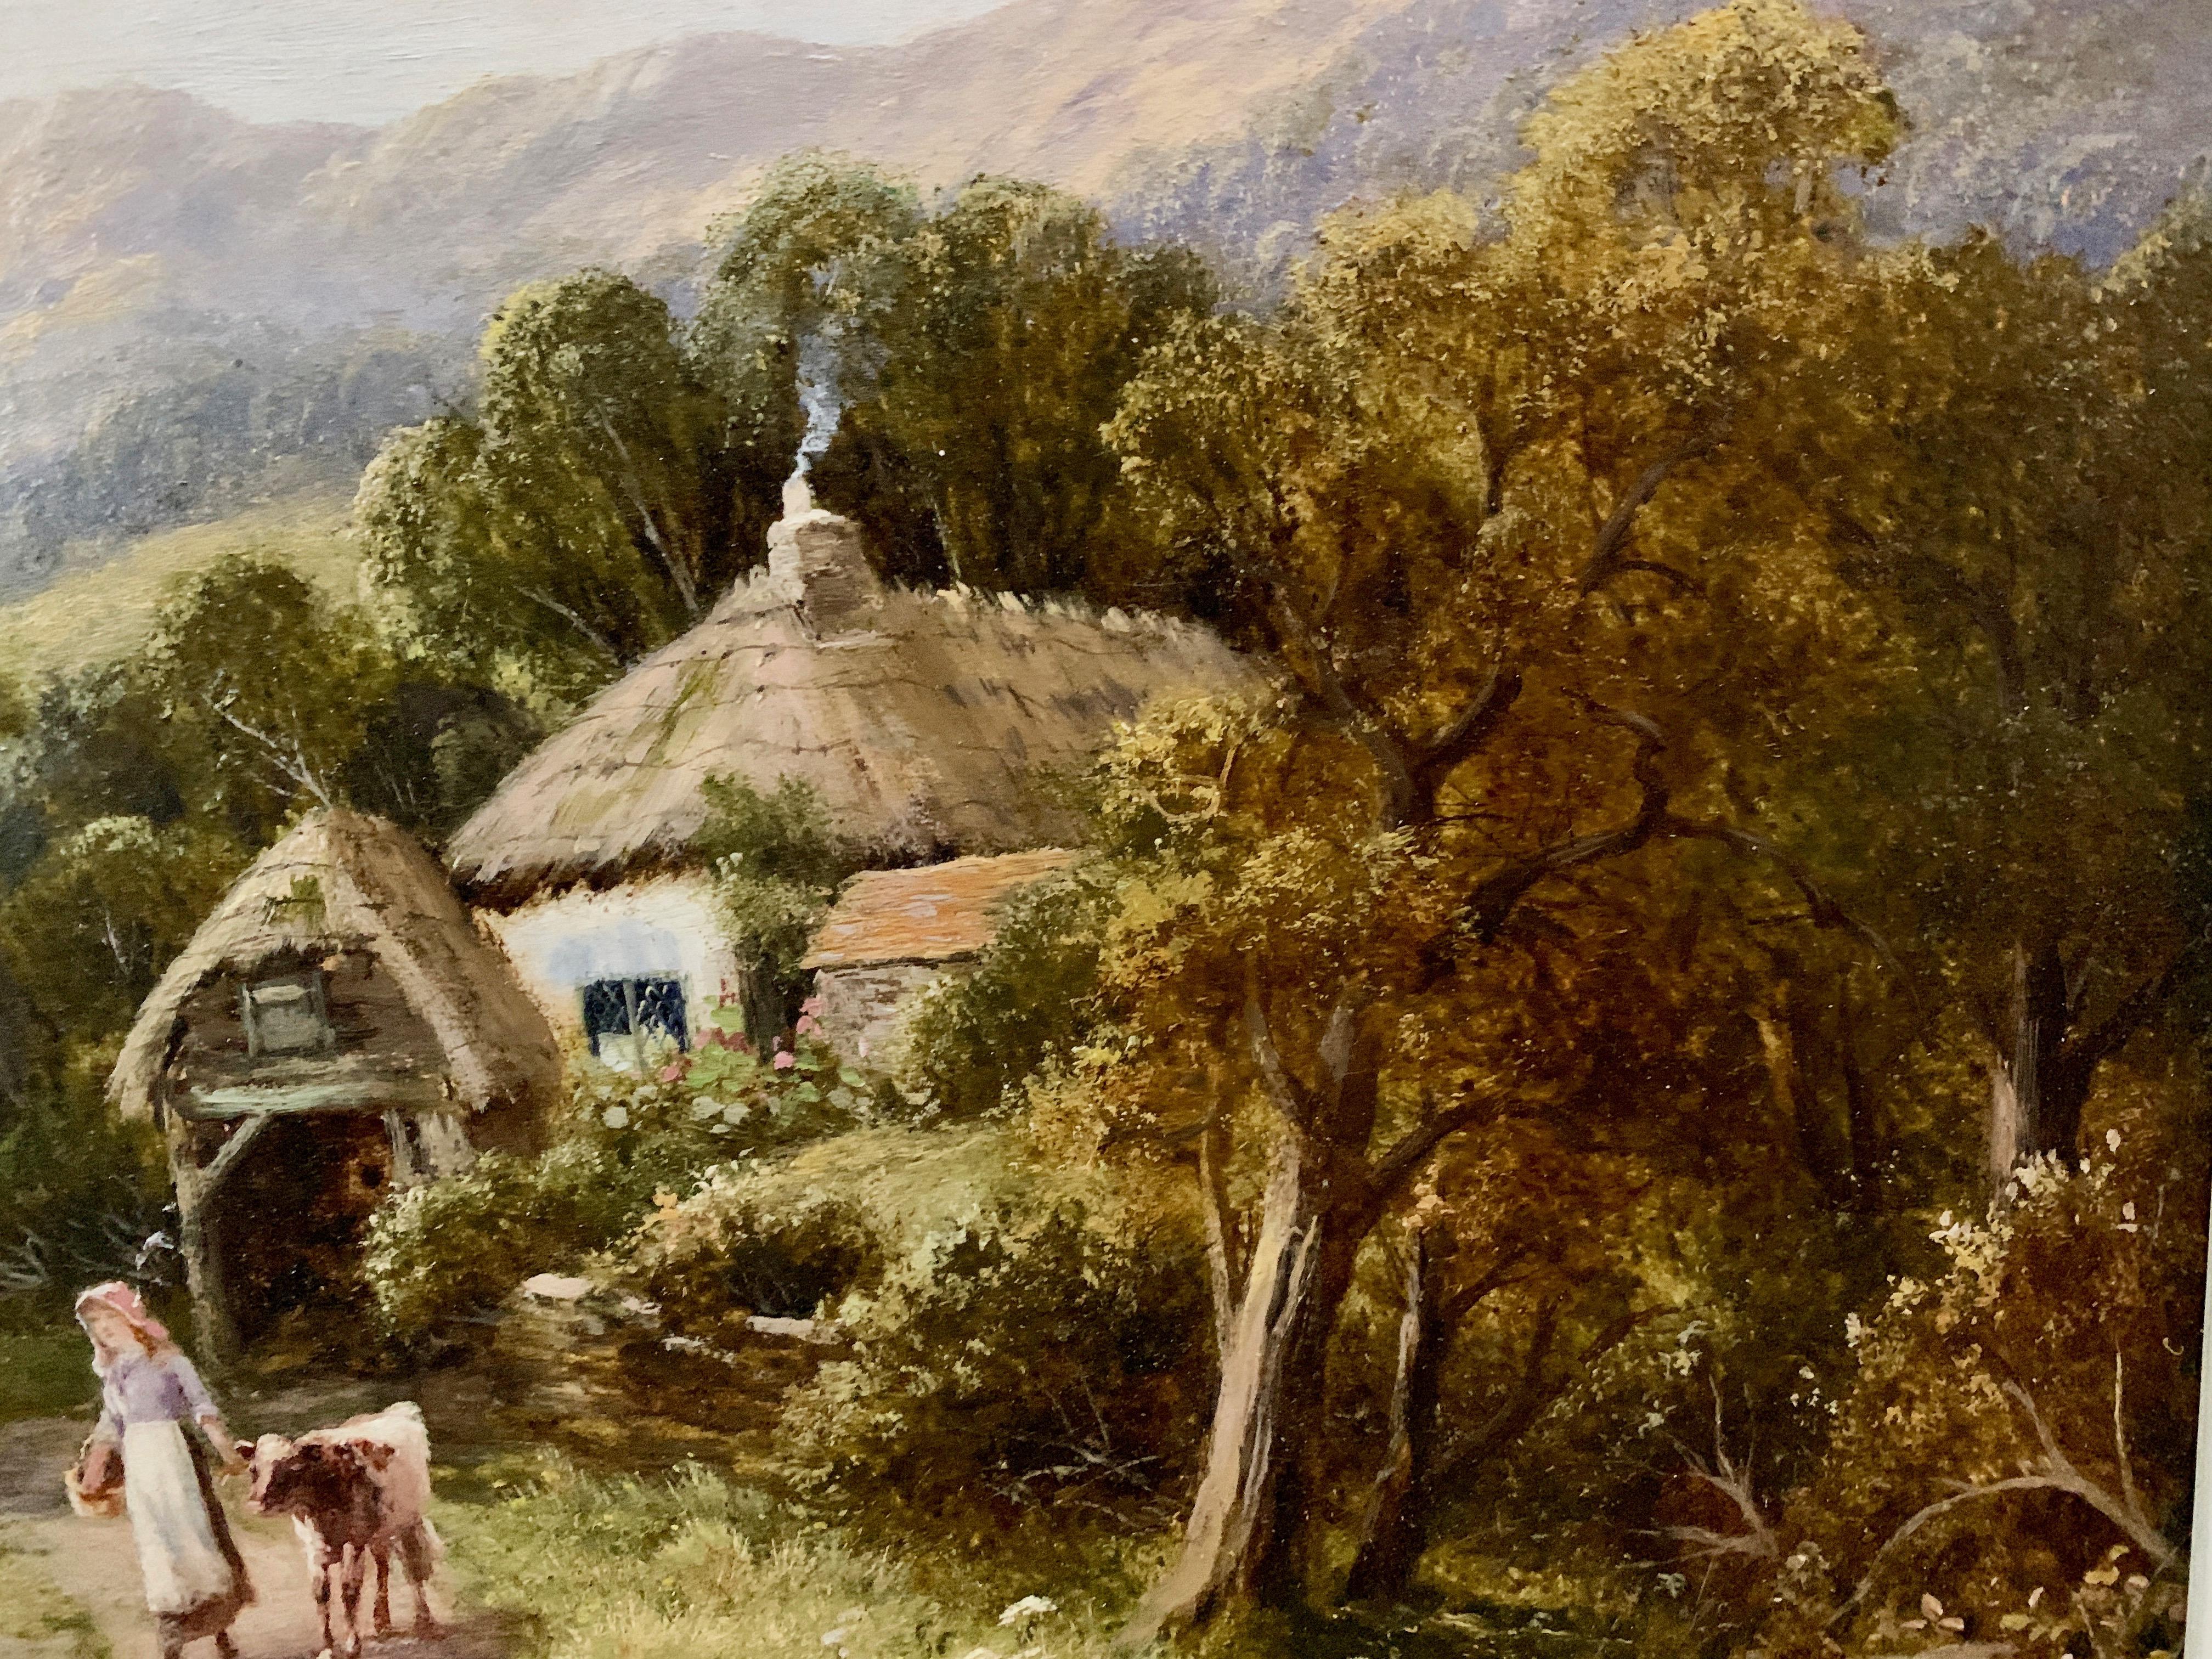 Wonderful English landscape with figures by a cottage harvesting grass in the distance.
Robert John Hammond was a landscape painter born in Hackney, London in 1853. Later on, he moved to the Midlands area where he became well known for his